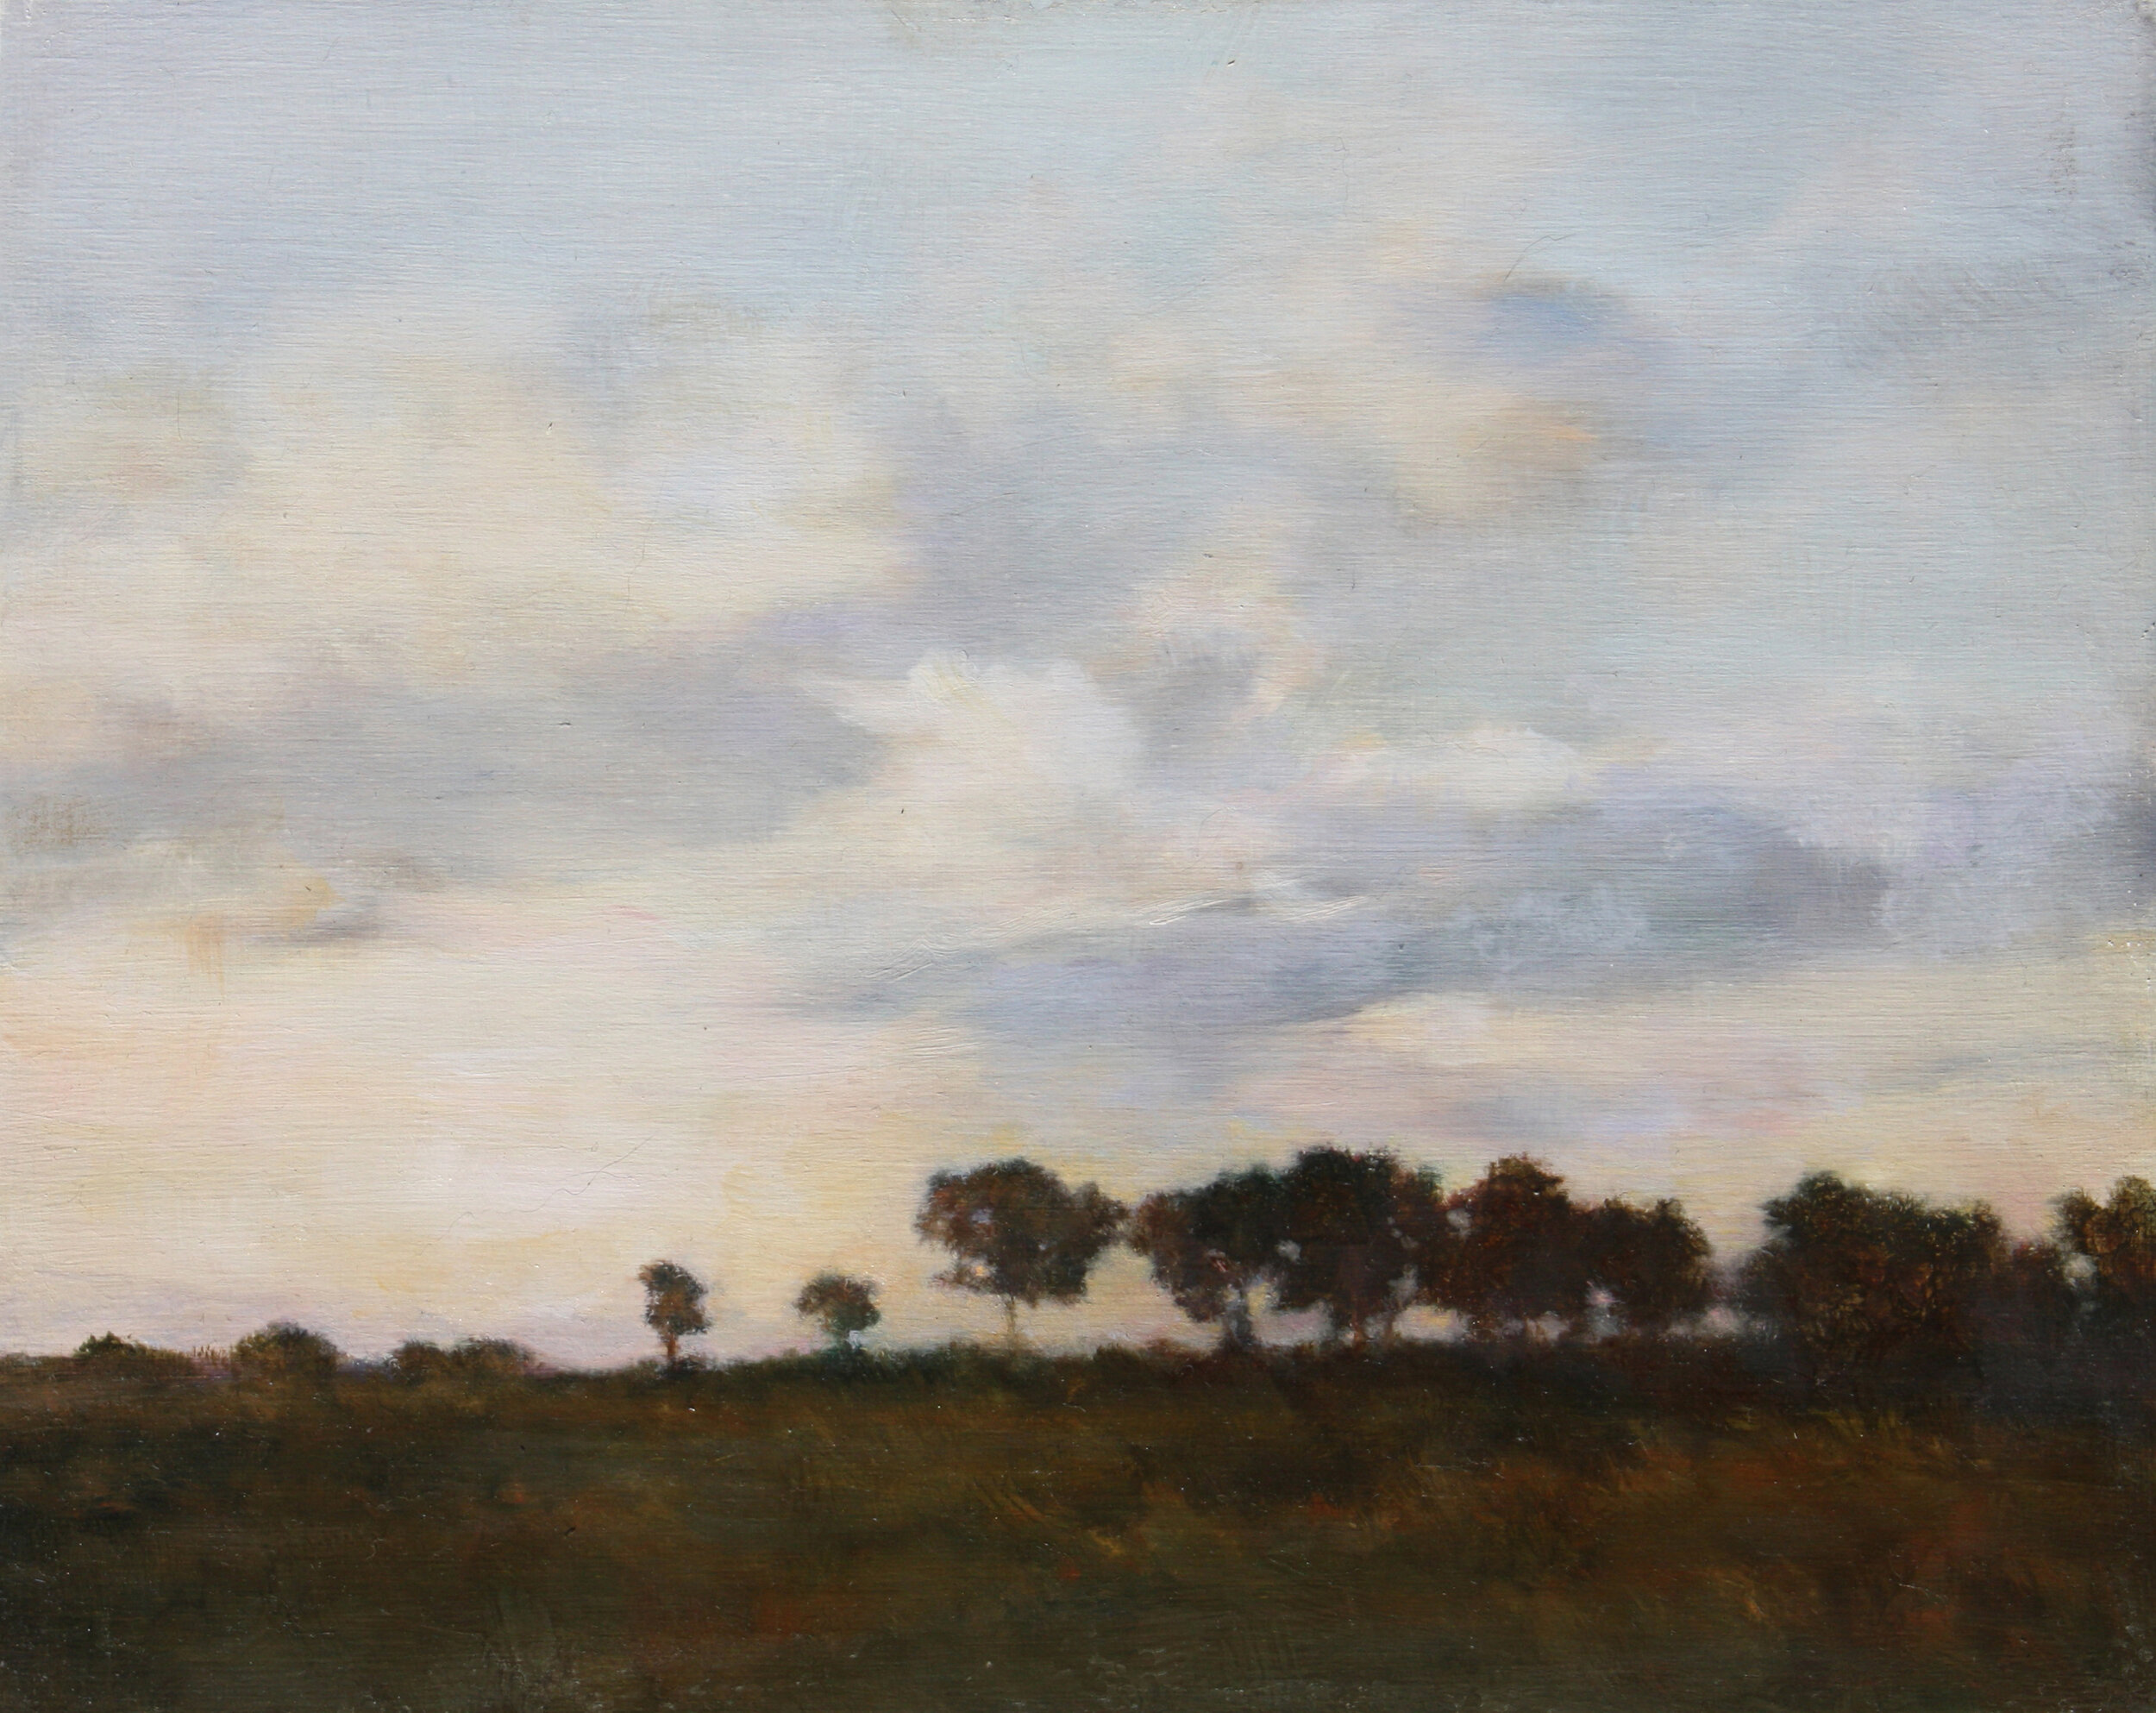  Mary Lou Schempf  Trees at Dusk,  8” x 10”, oil on board   (private collection)  